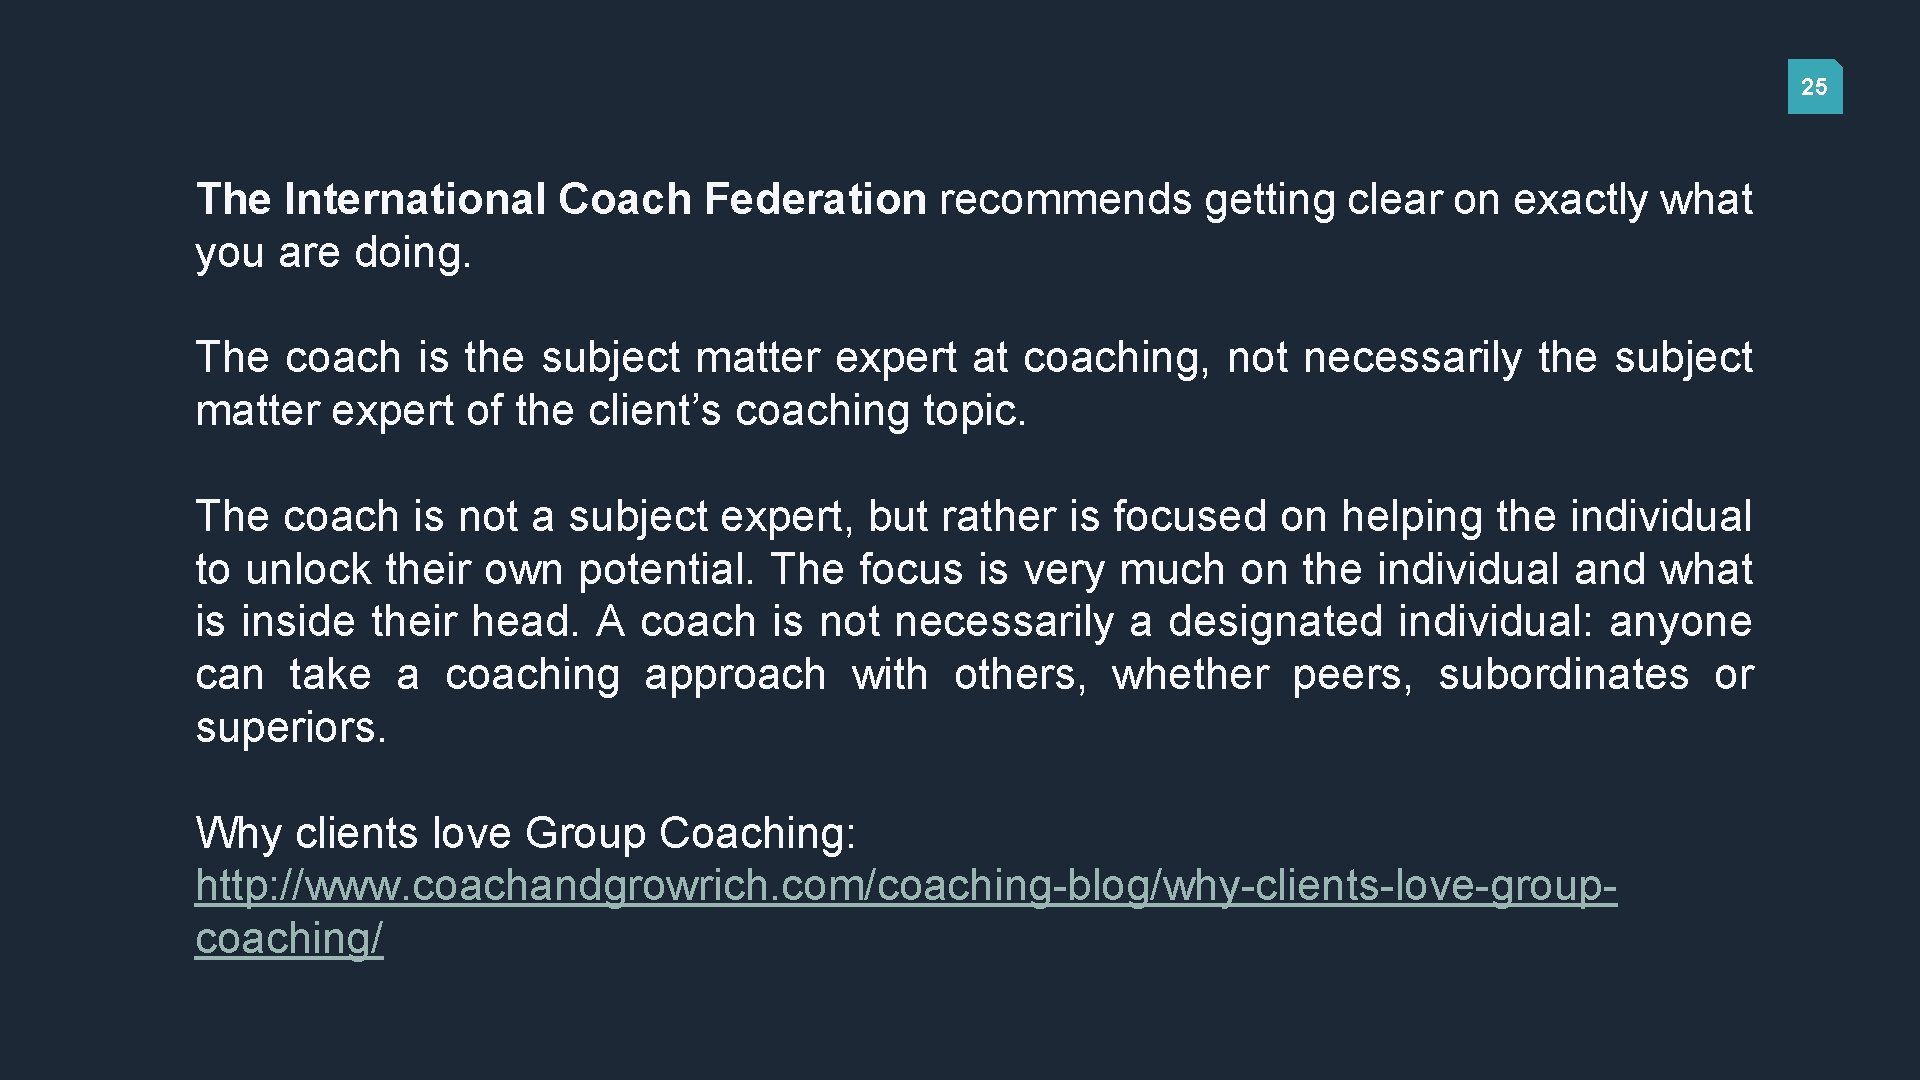 25 The International Coach Federation recommends getting clear on exactly what you are doing.